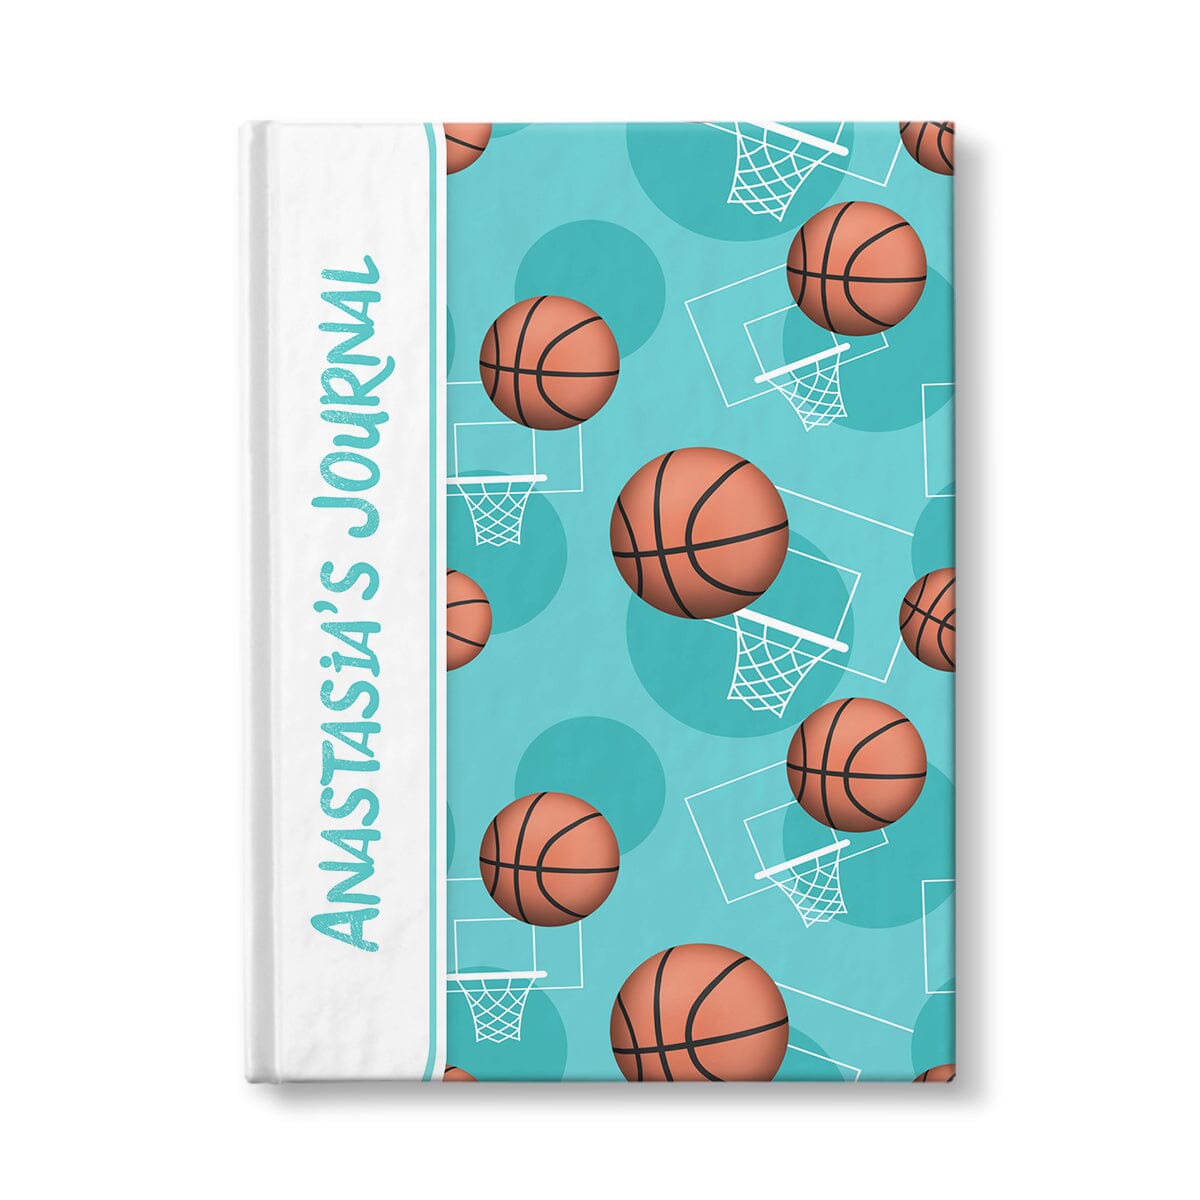 Personalized Teal Basketball Journal at Artistically Invited.